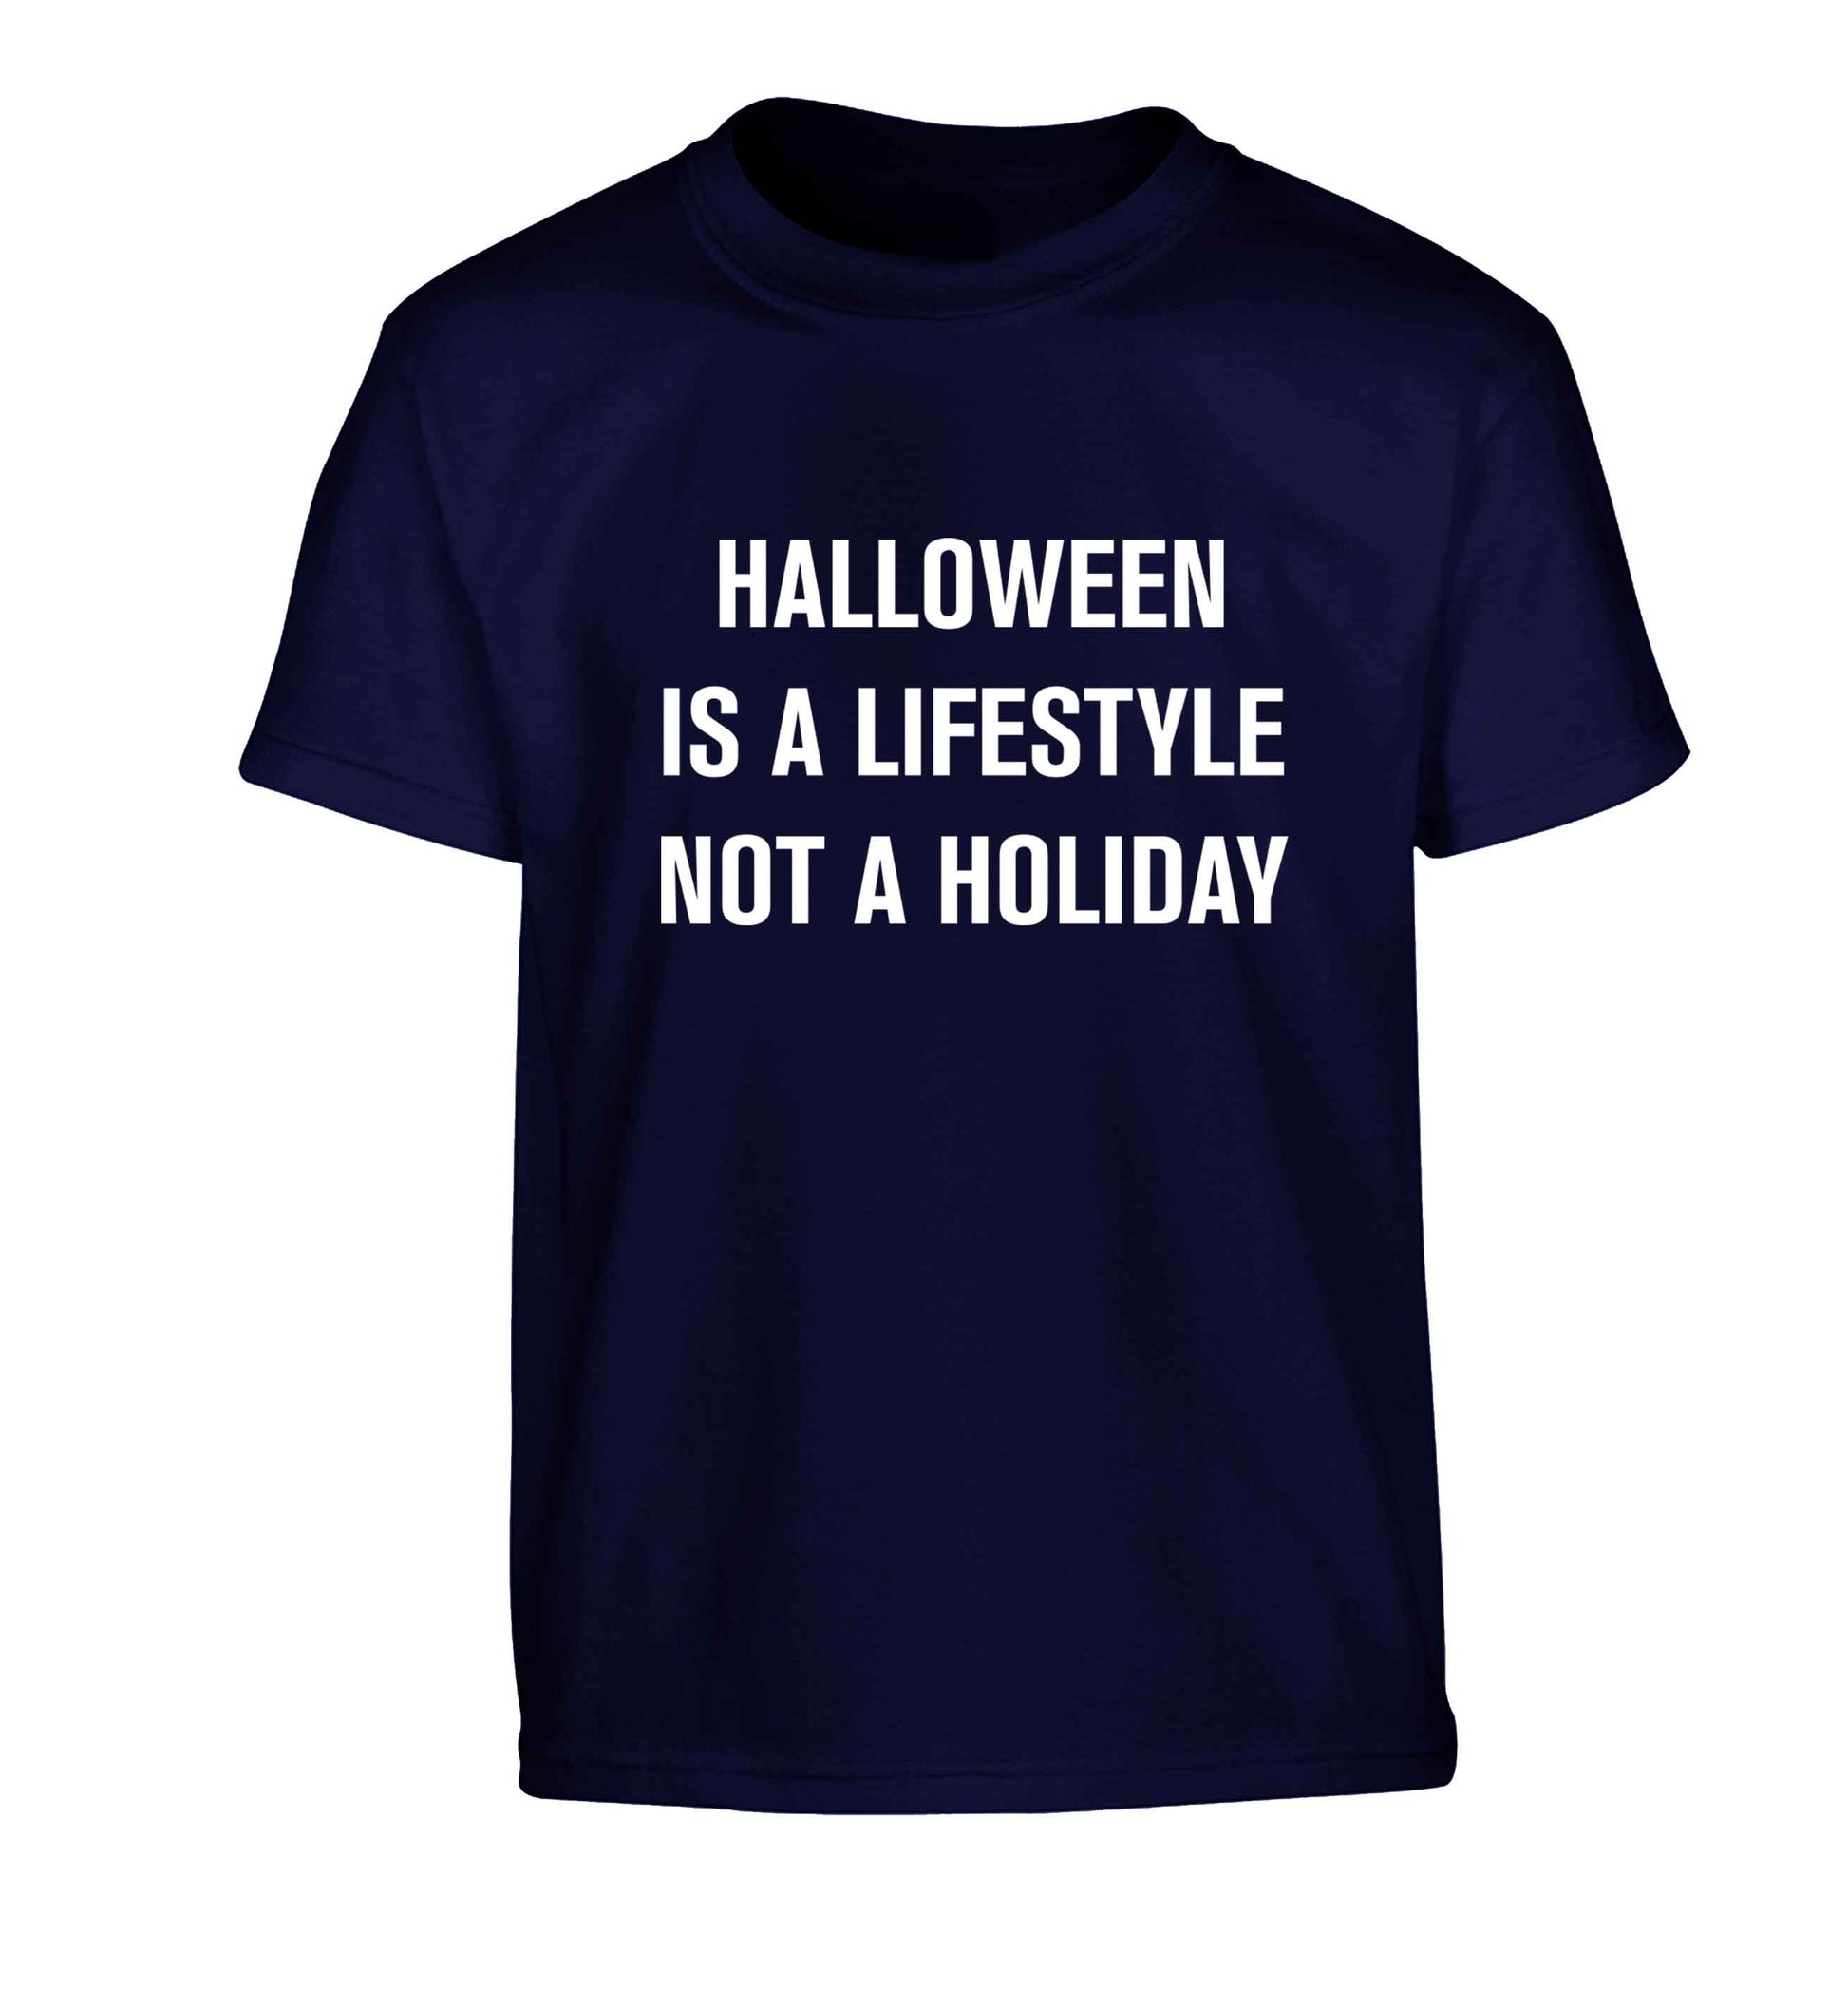 Halloween is a lifestyle not a holiday Children's navy Tshirt 12-13 Years